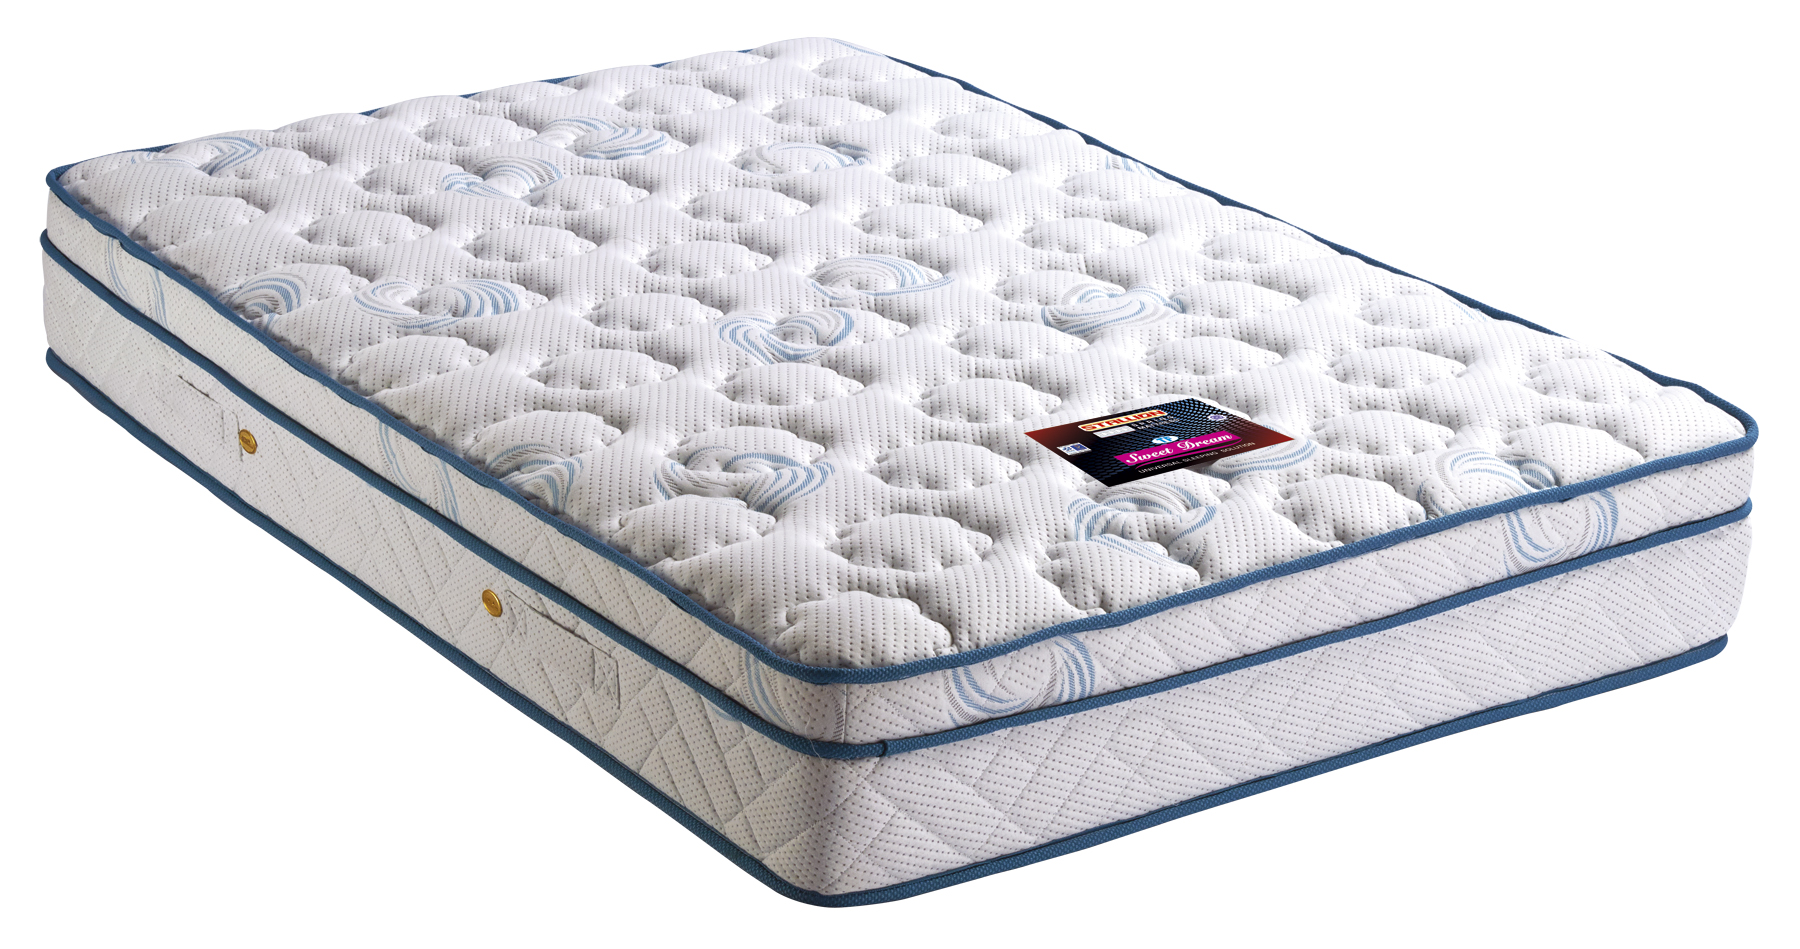 spring mattress good for baby